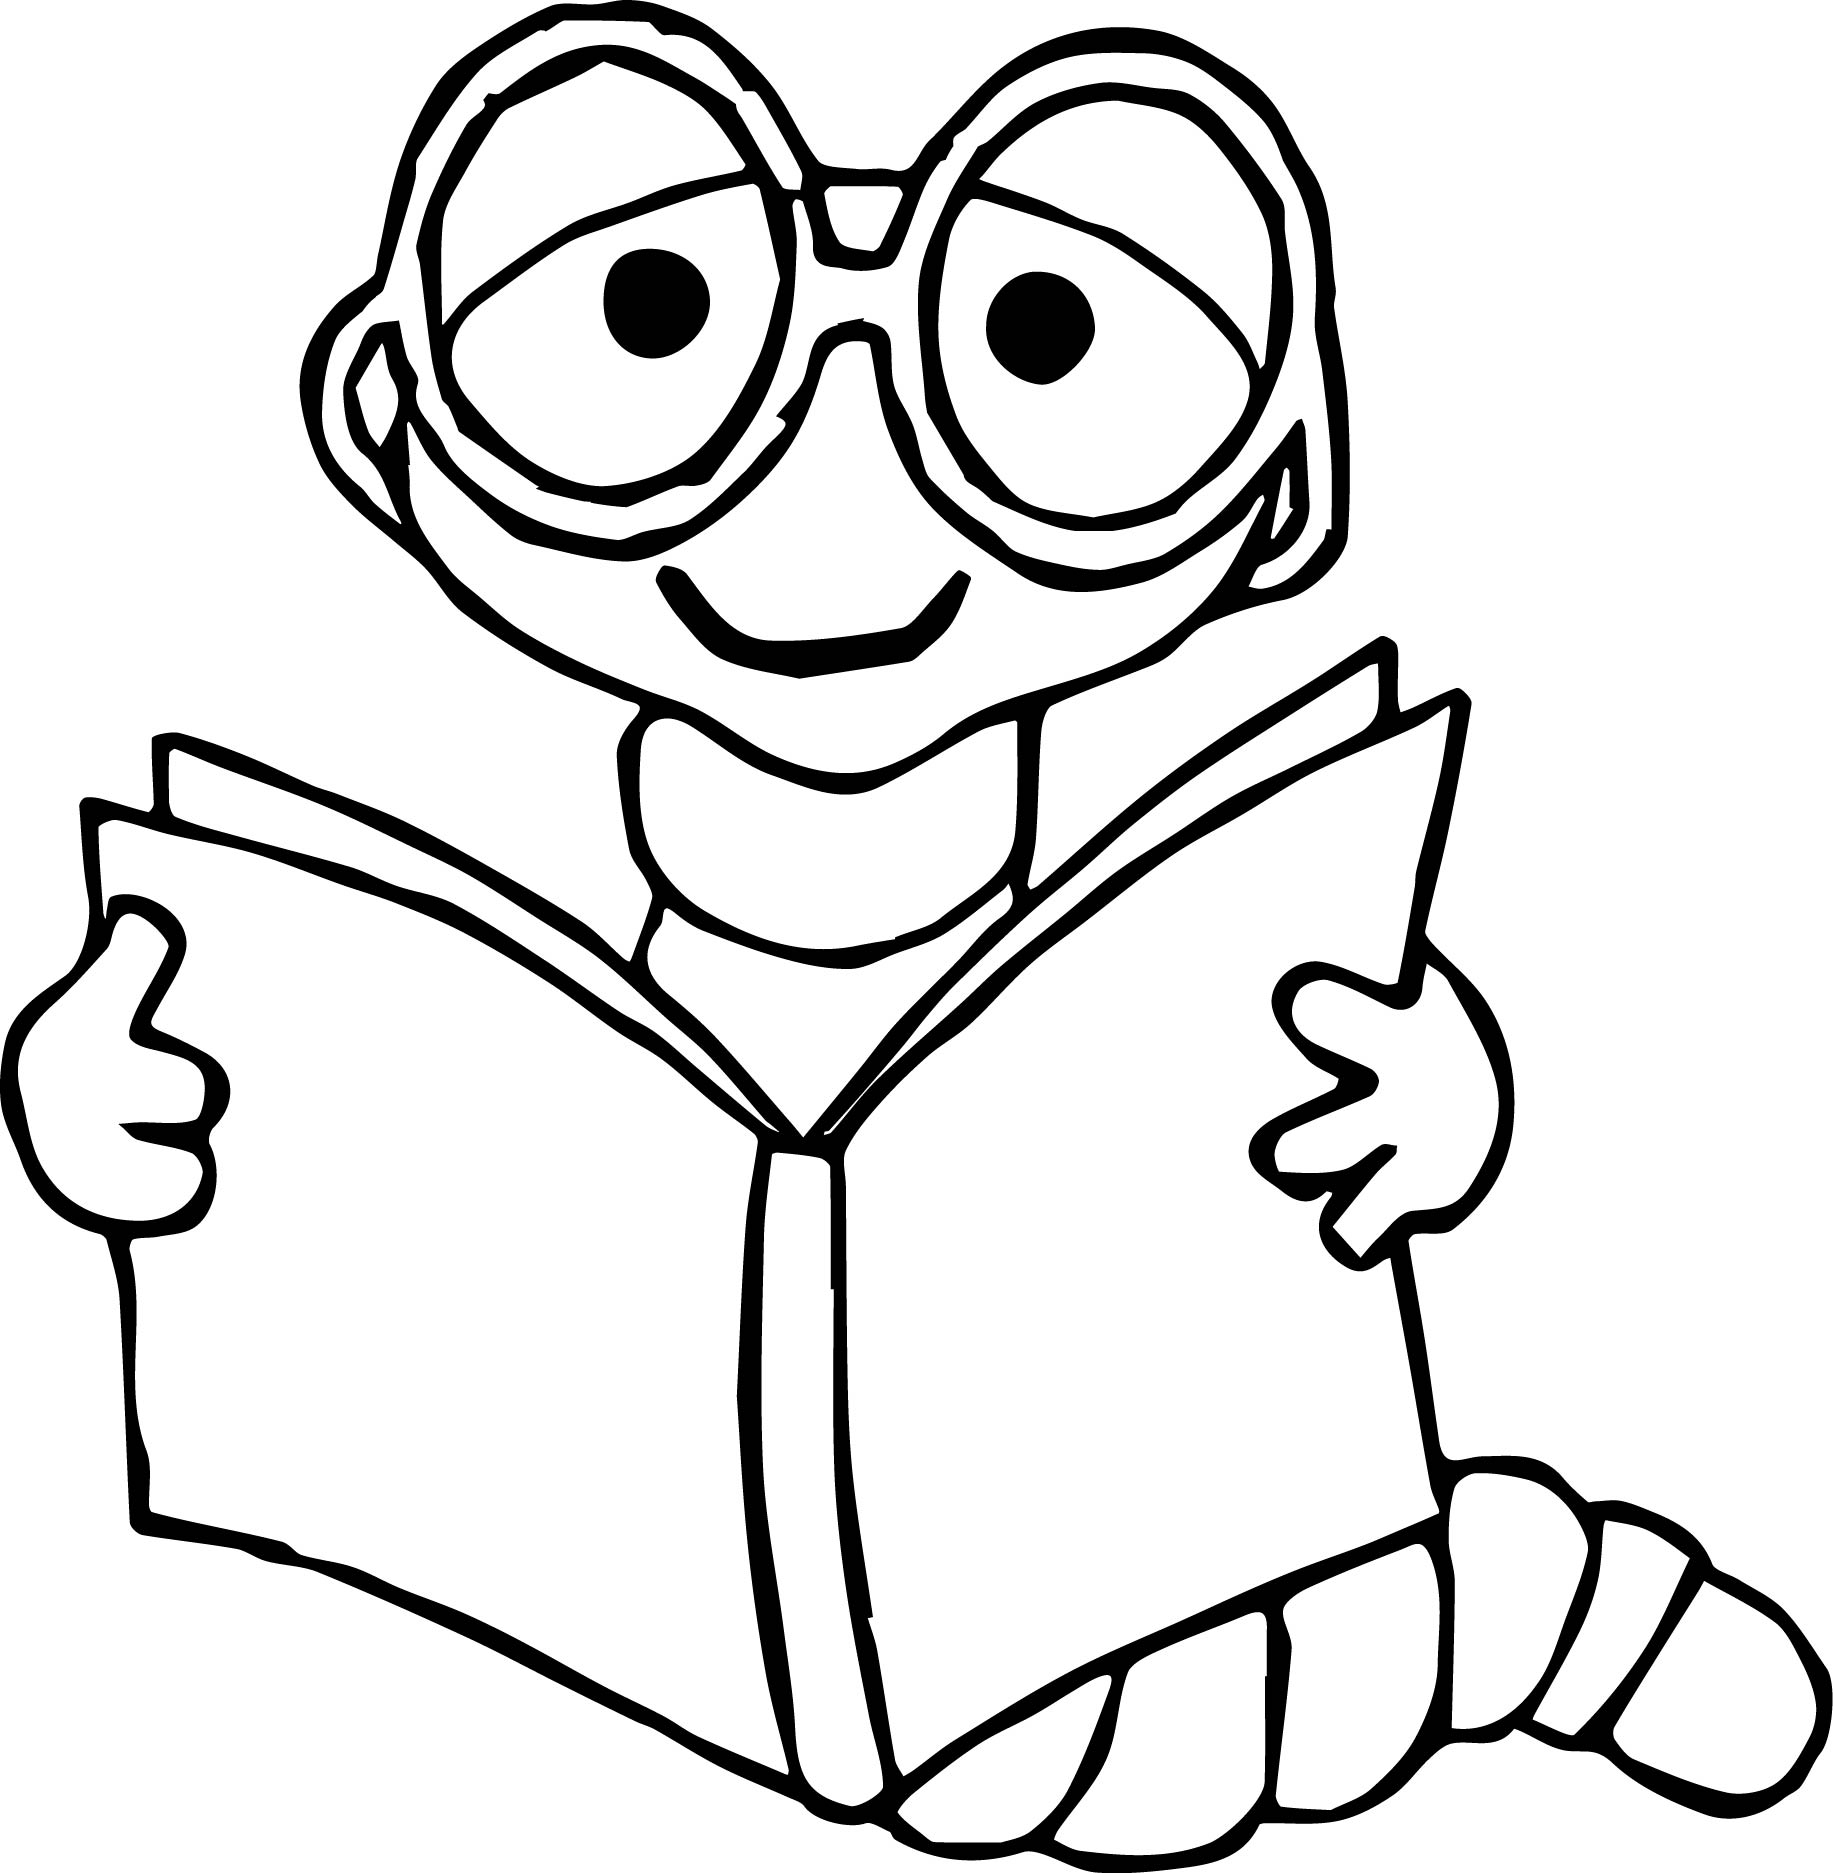 3rd Grade Coloring Pages | Free download on ClipArtMag